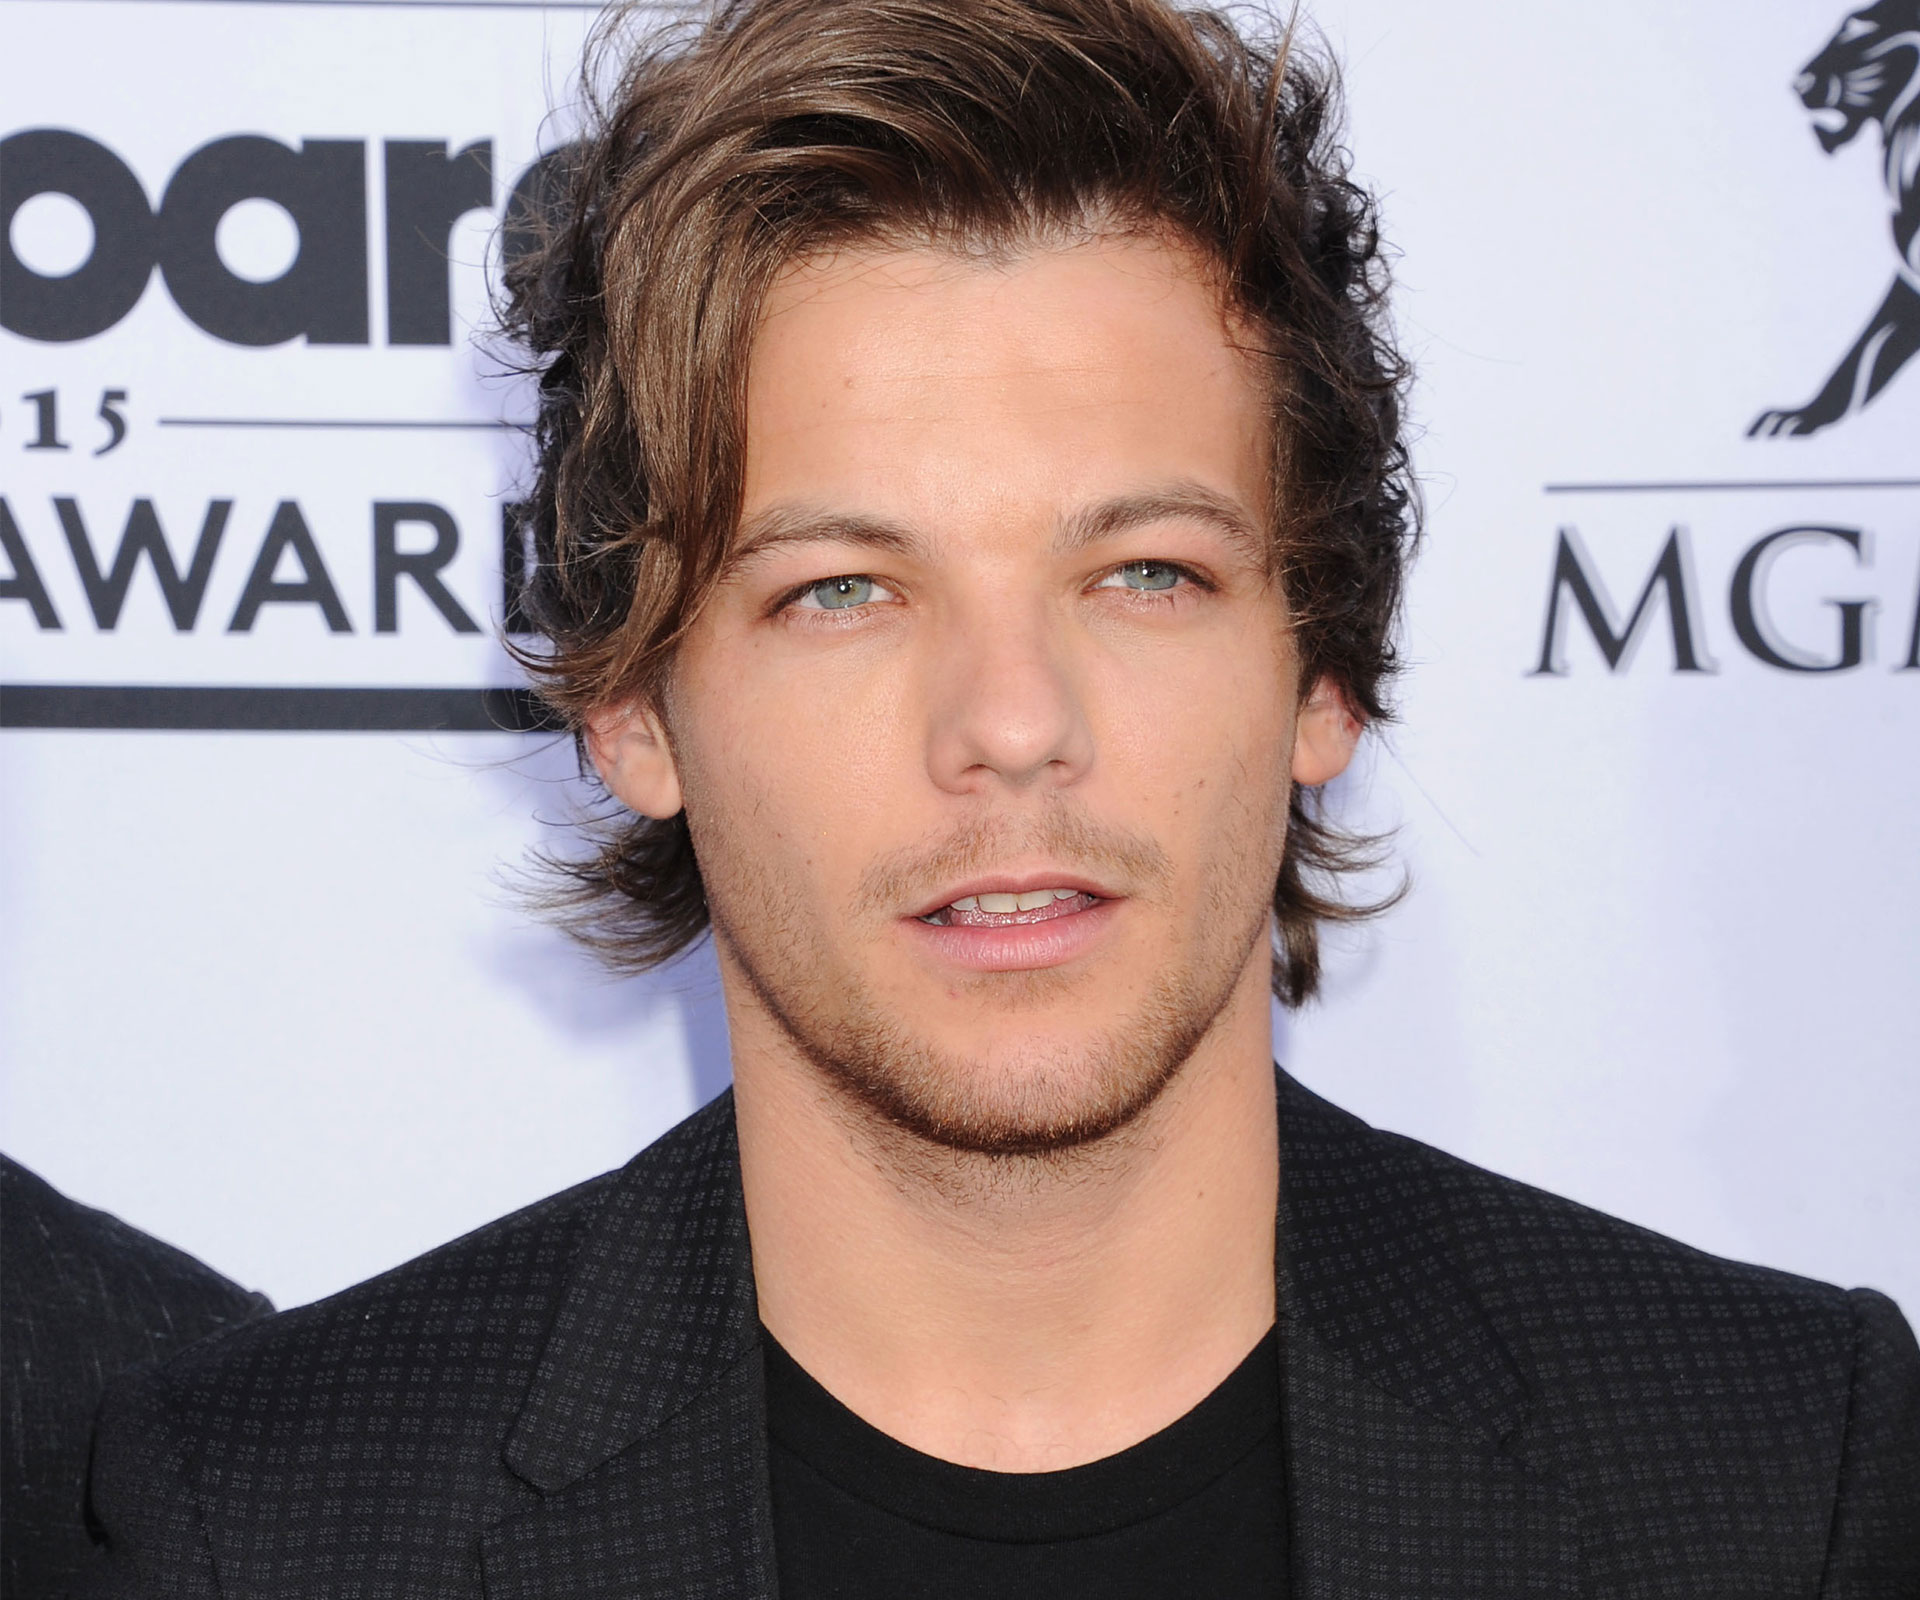 Is One Direction's Louis Tomlinson going to be a dad?